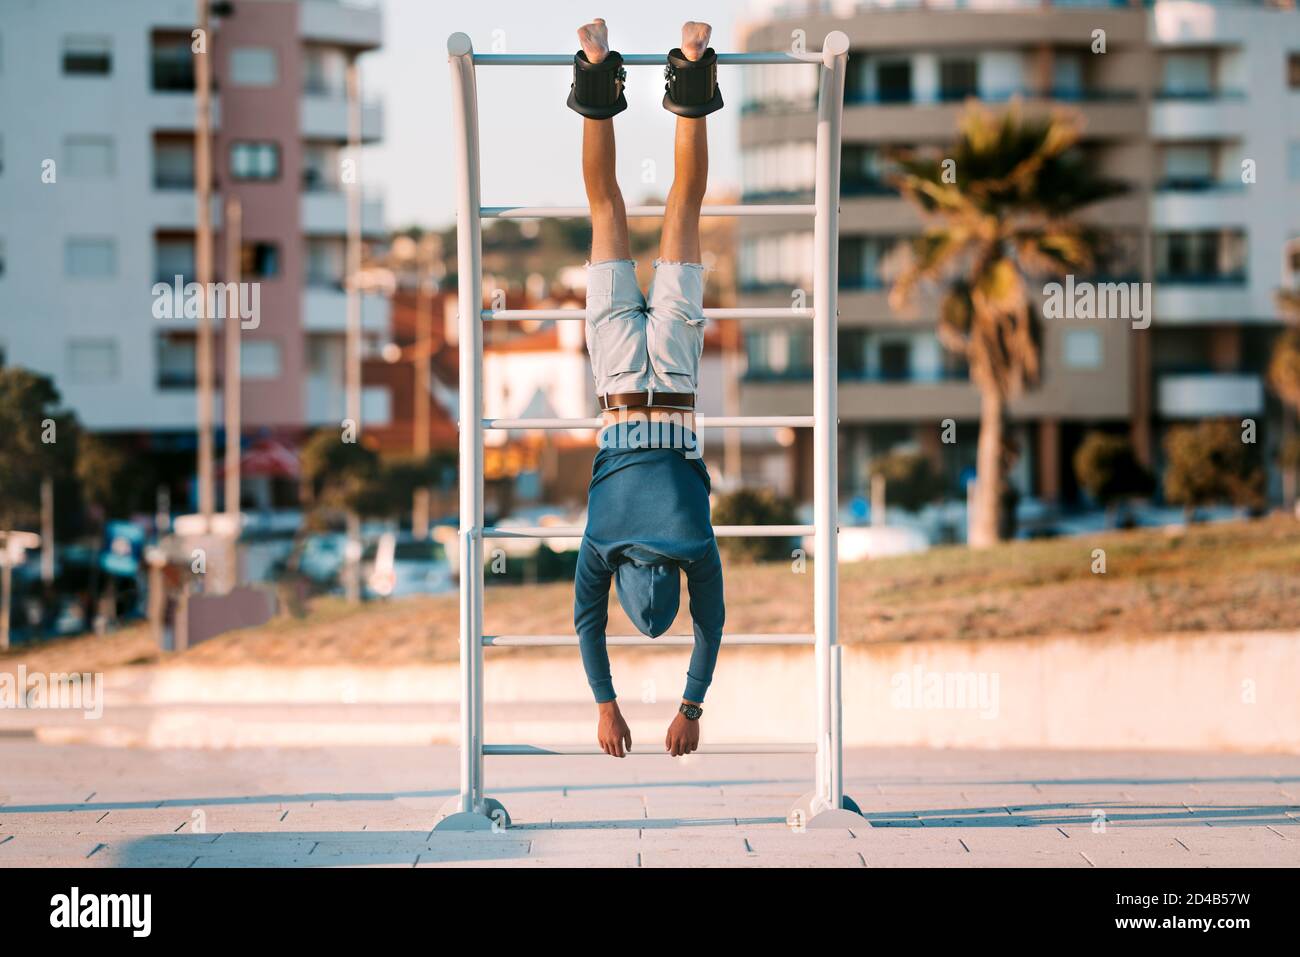 Man hanging upside down on the horizontal bar in anti gravity or inversion boots. Sports equipment. Healthy lifestyle. Stock Photo